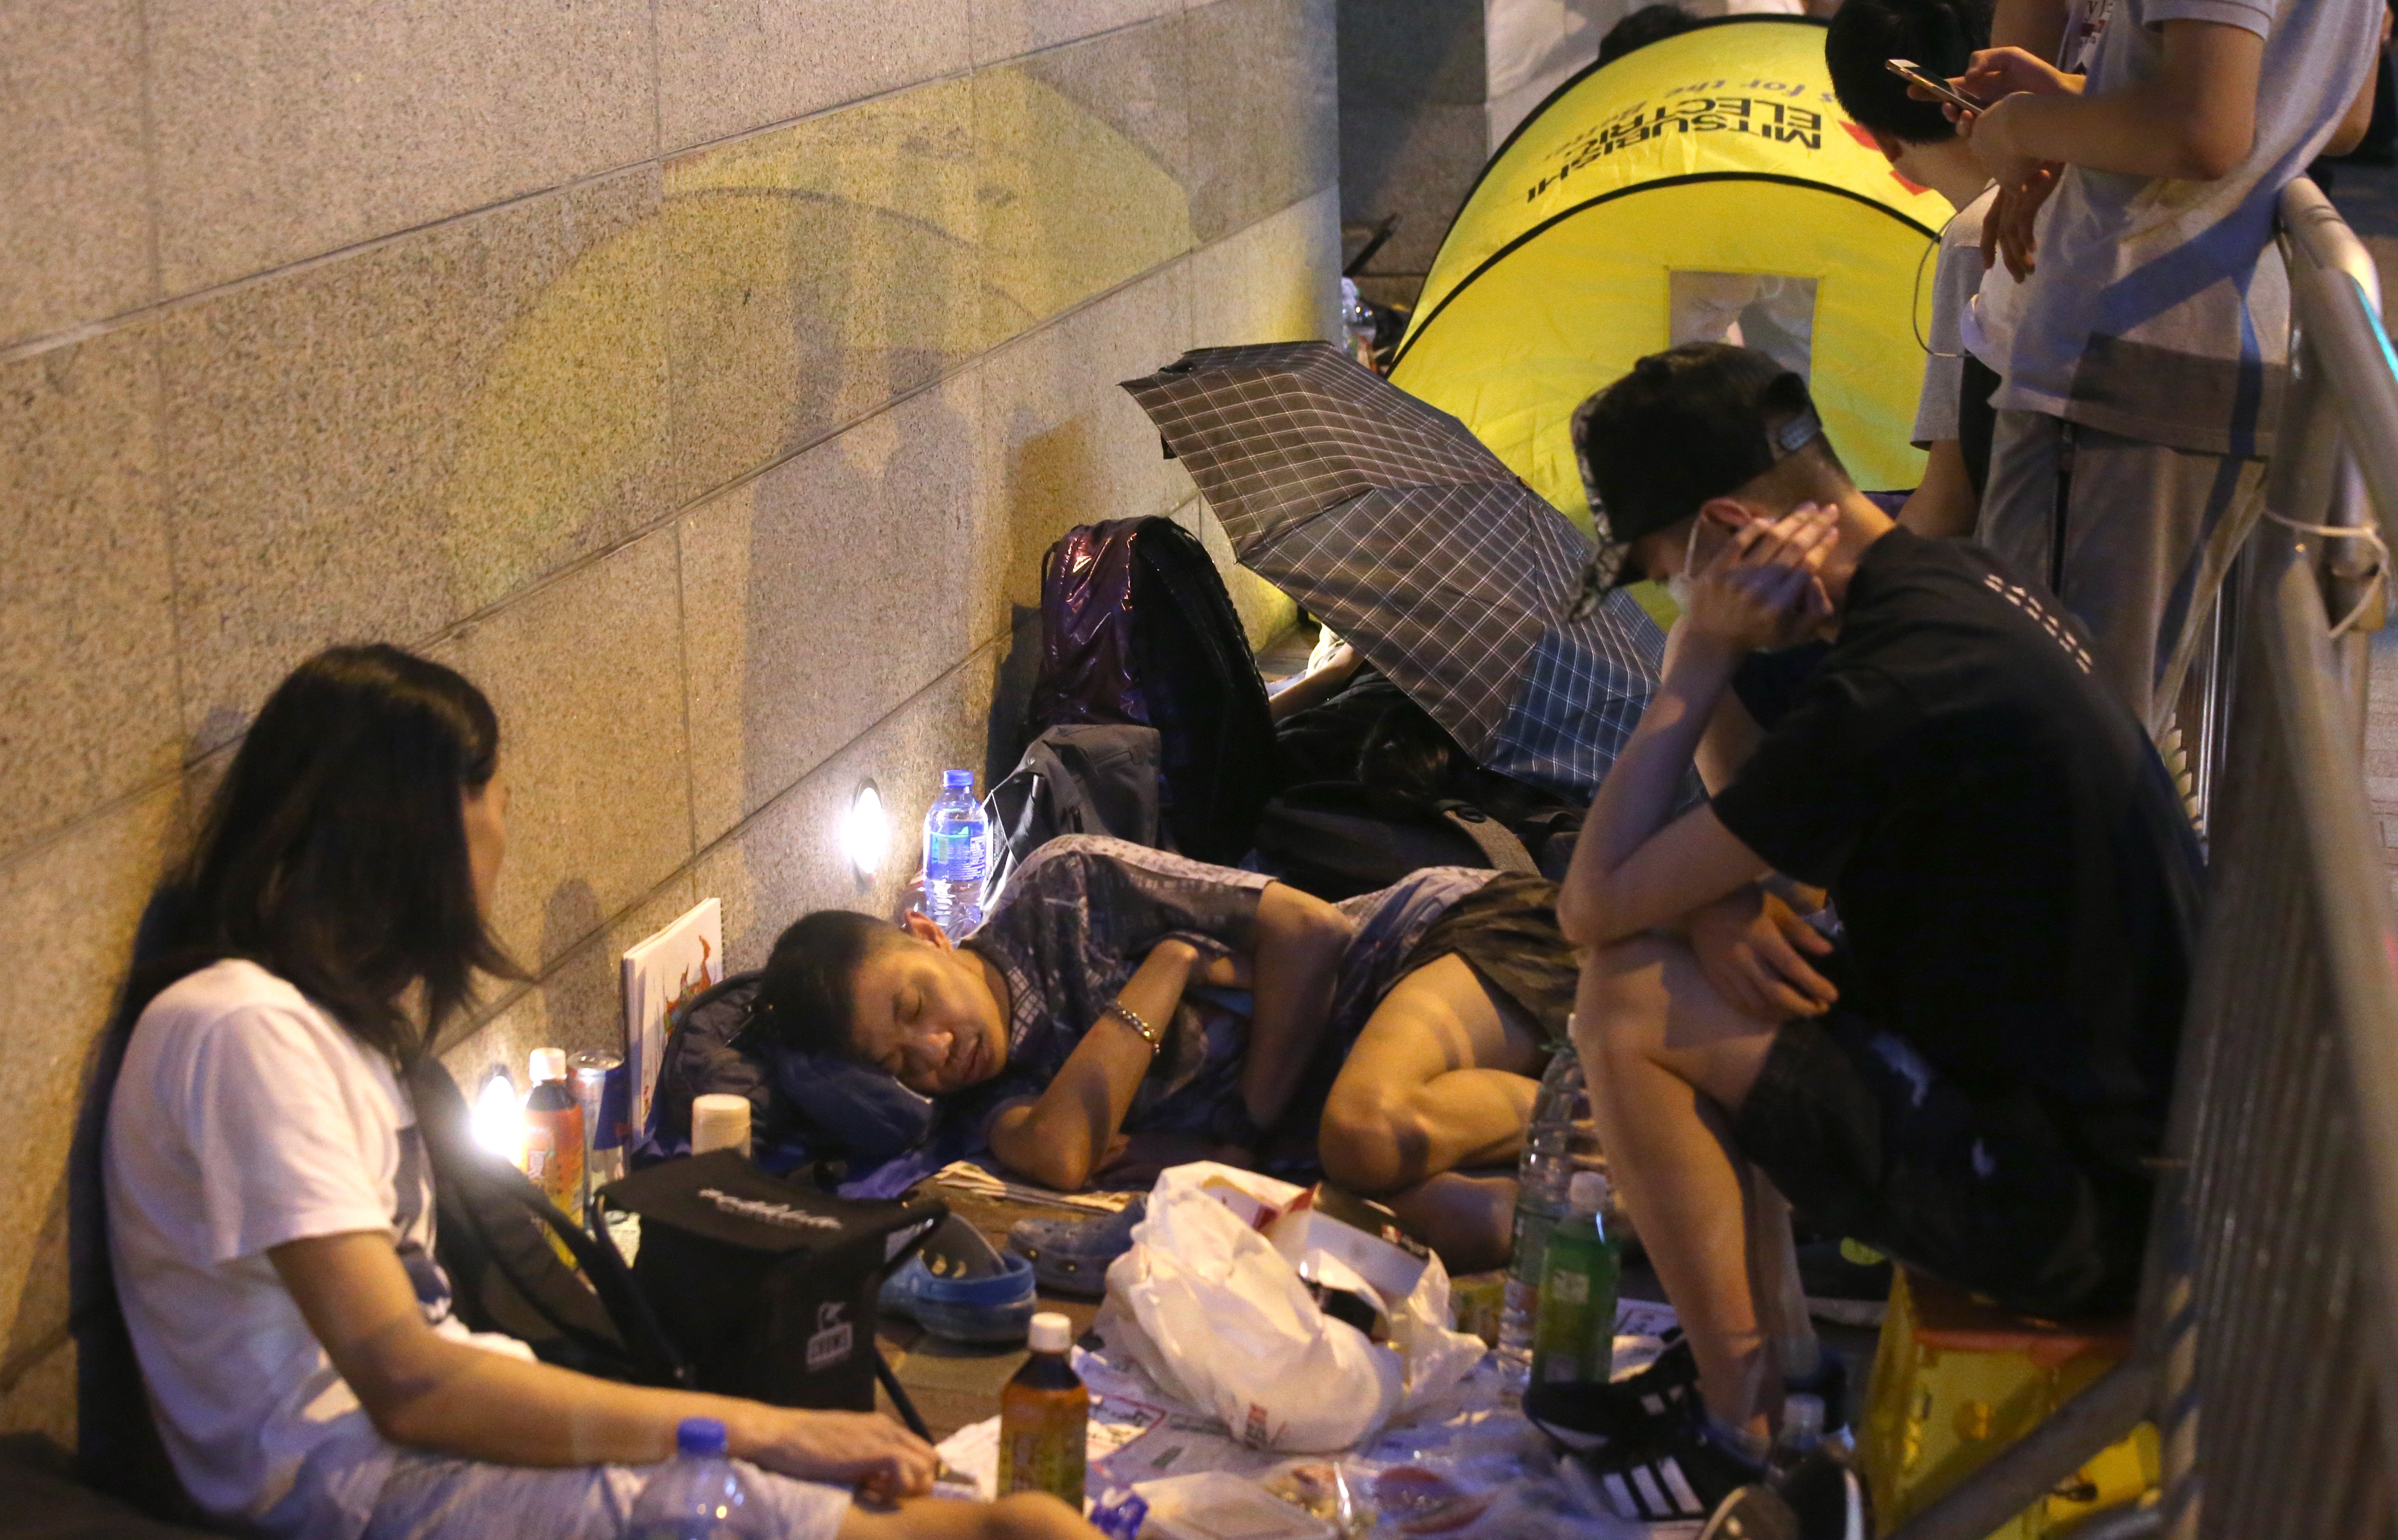 Enthusiasts queue up overnight for the opening of the Ani-Com fair. Photo: K. Y. Cheng